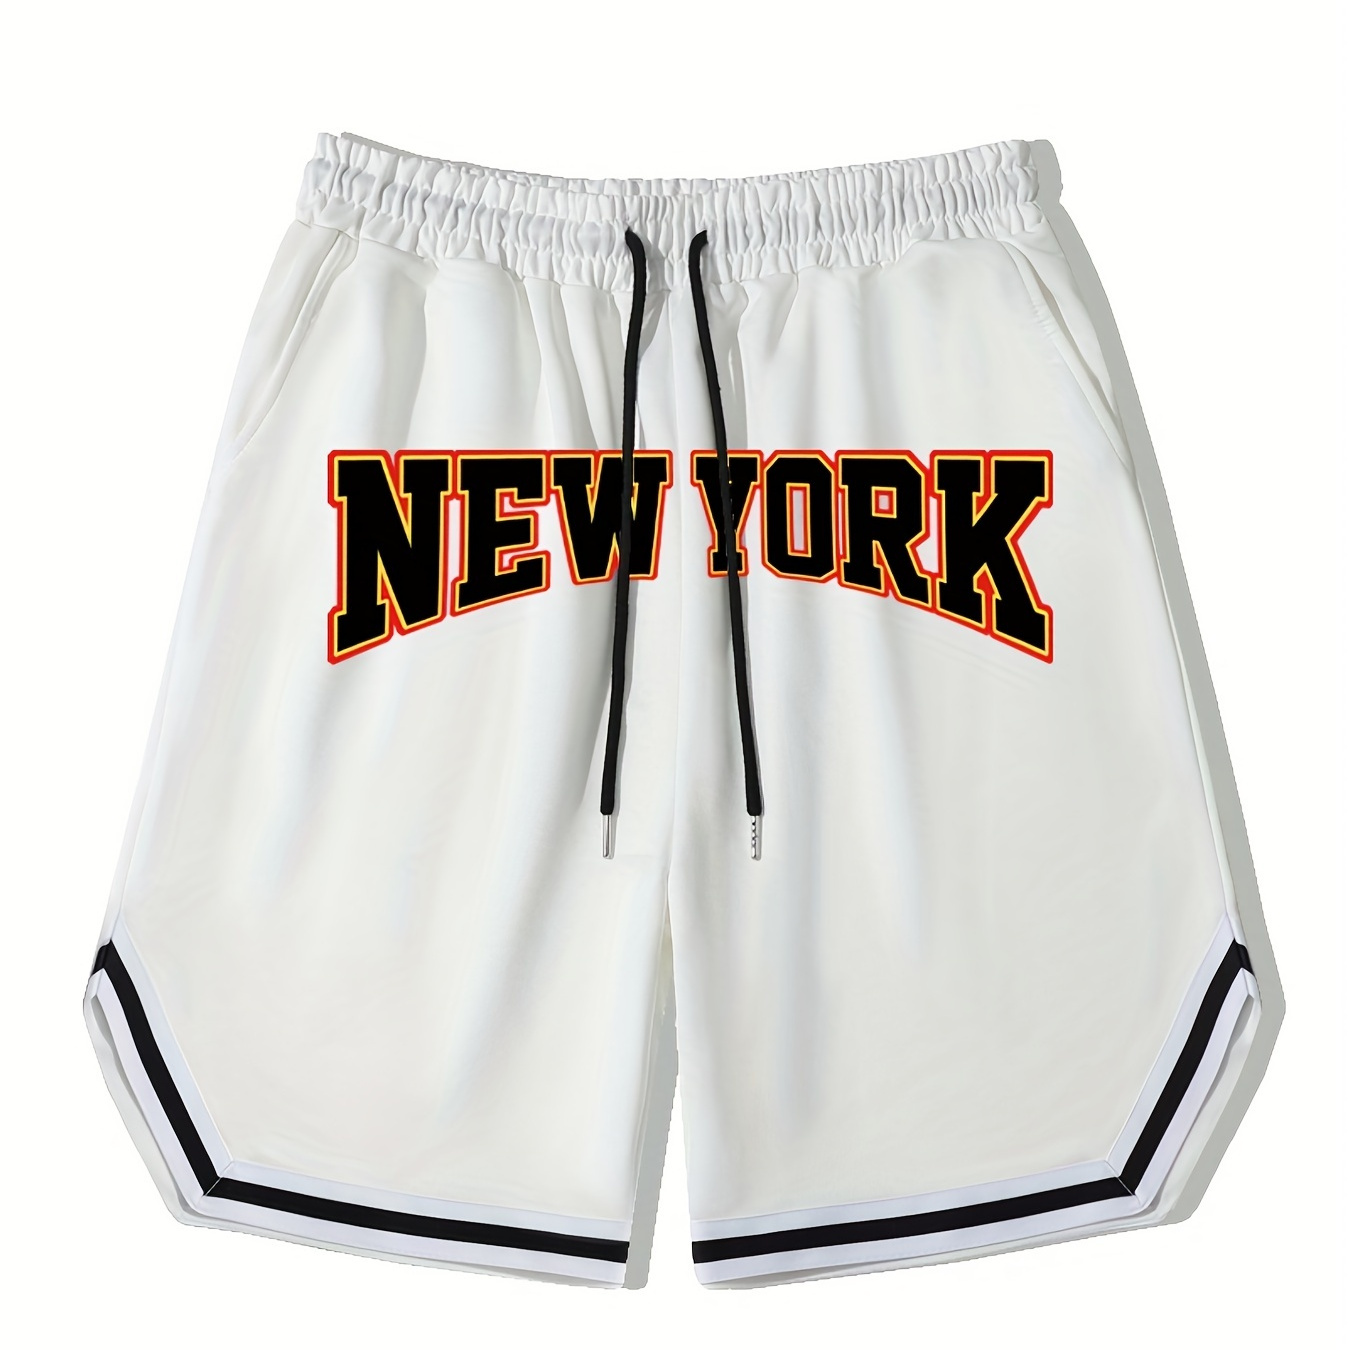 

Men's Streetwear Shorts, "new York" Graphic Drawstring Stretchy Short Pants For Comfort & Casual Chic Style, Summer Clothings Men's Fashion Outfits